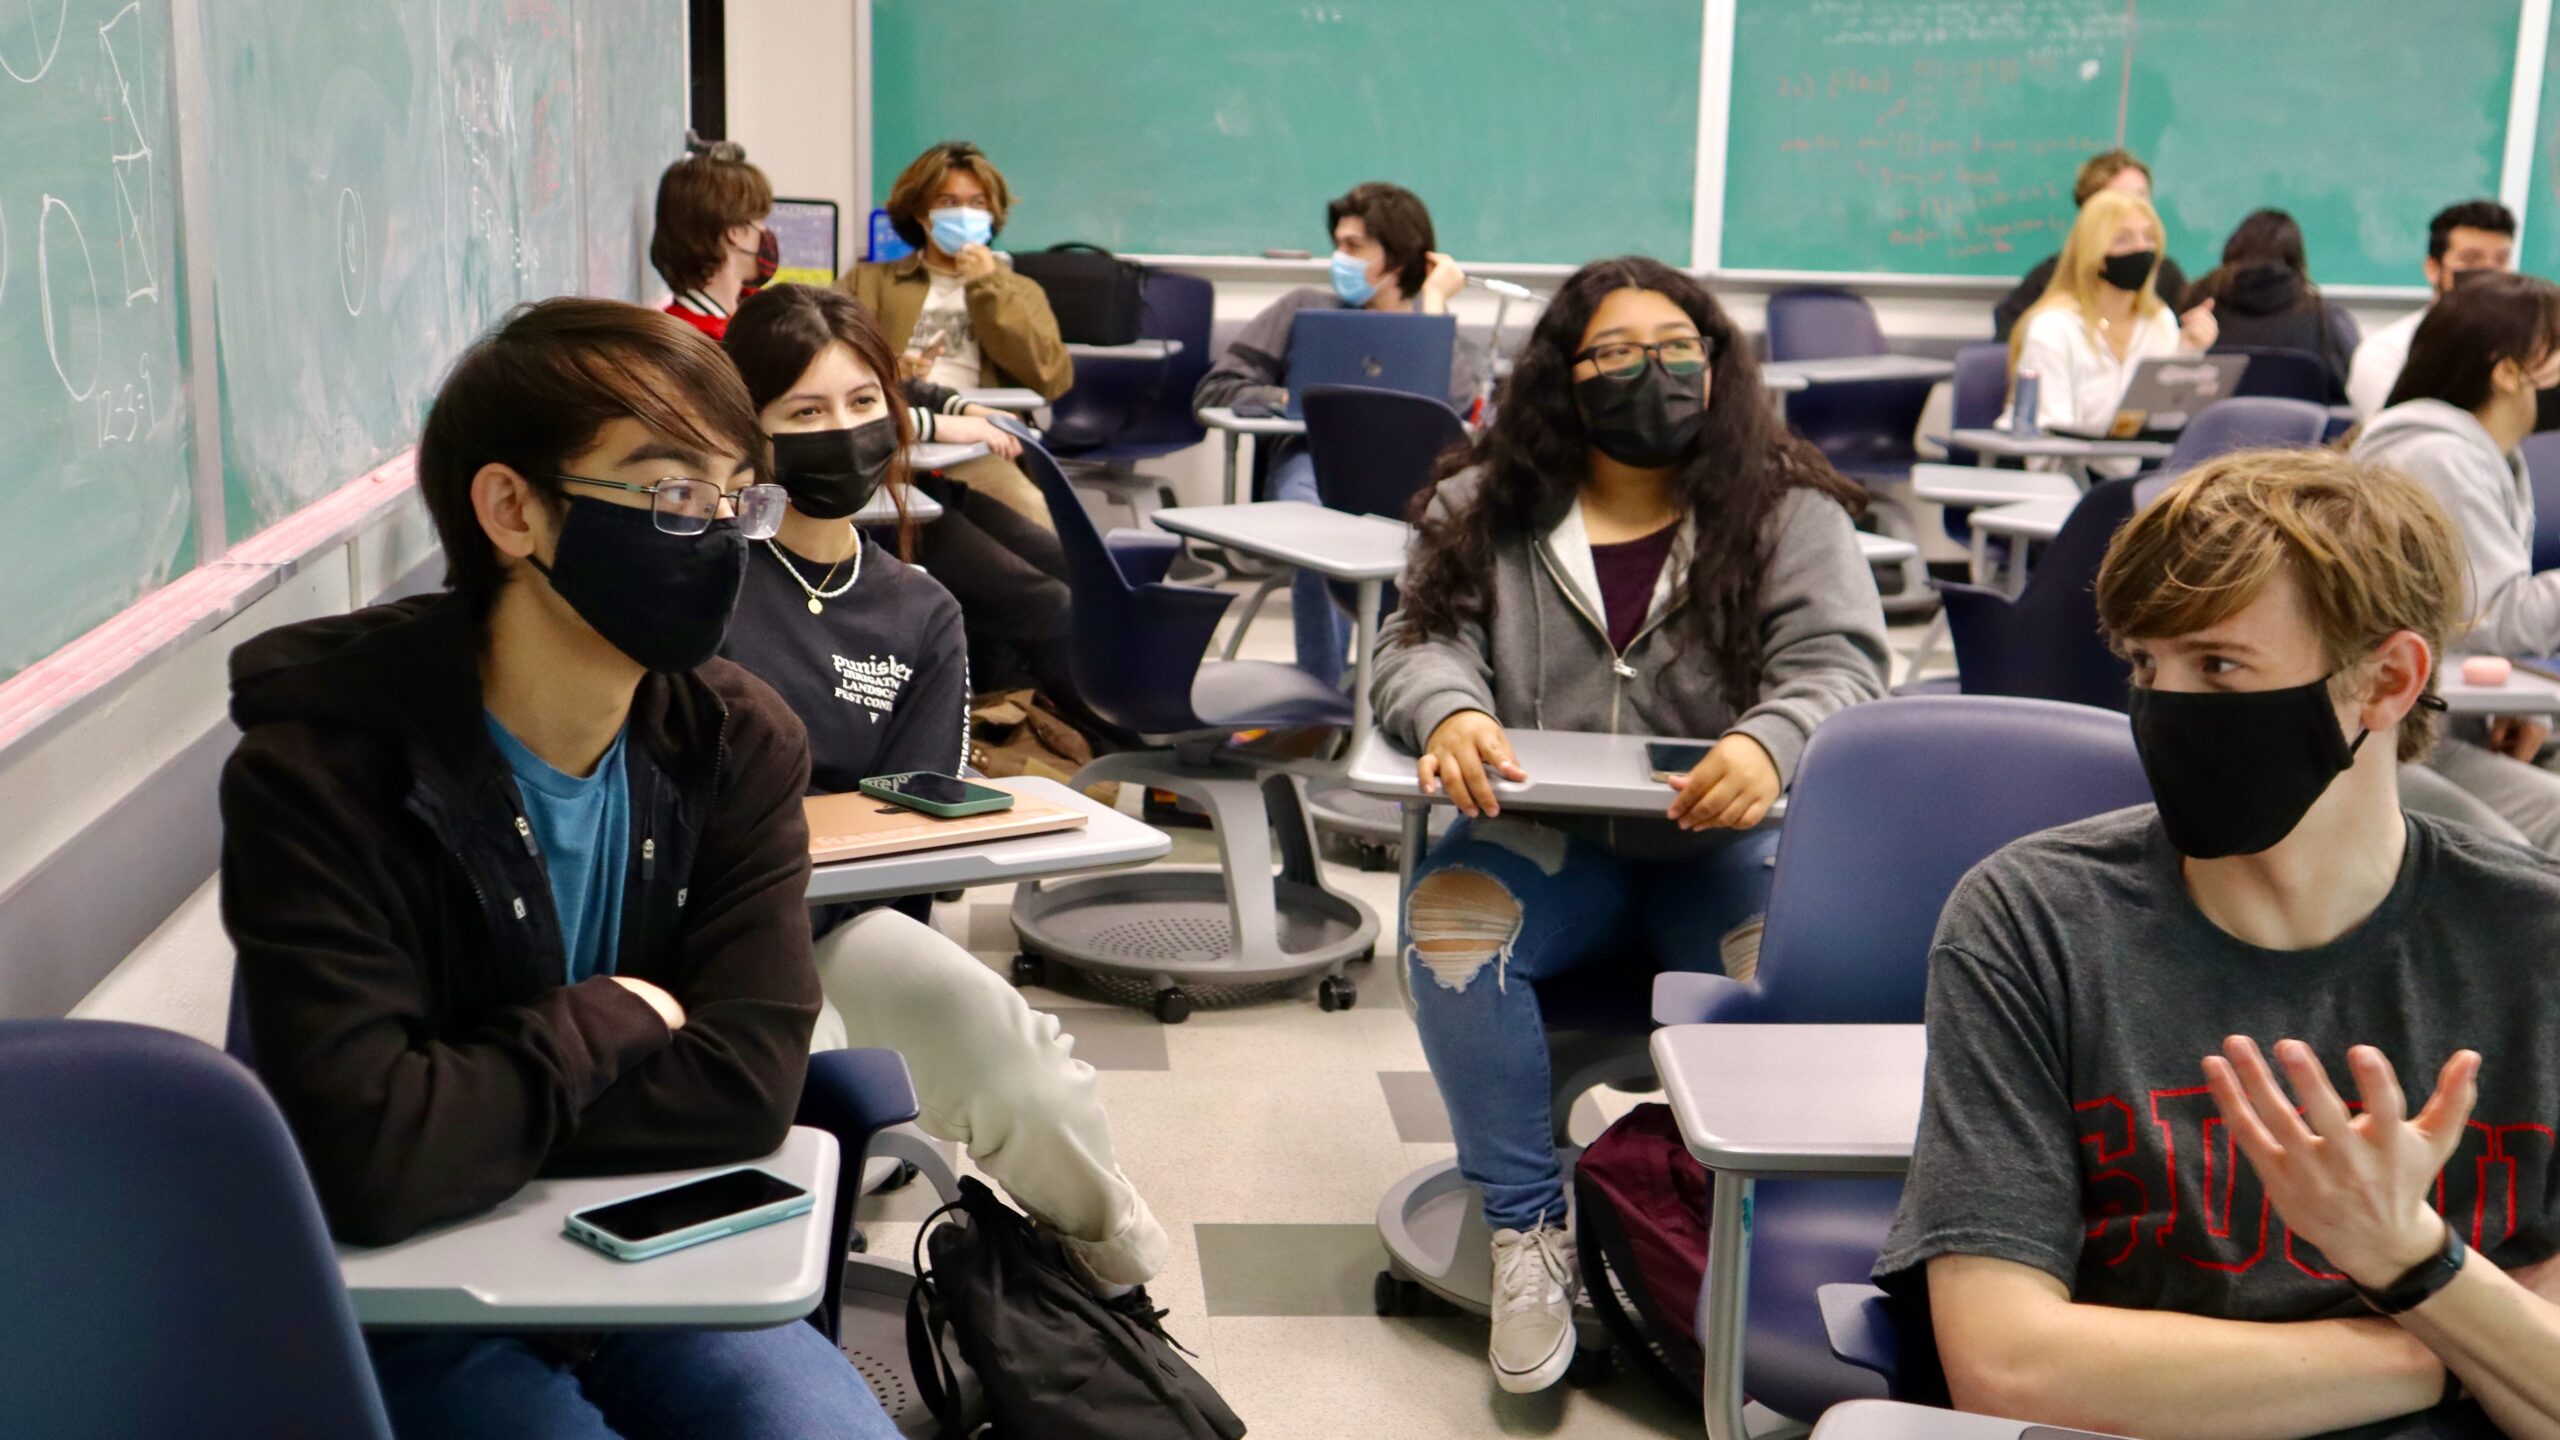 Students in CS 100 class discuss answers to interactive clicker questions in small groups while sitting in chairs. Their phones are on their desks and they are wearing masks.